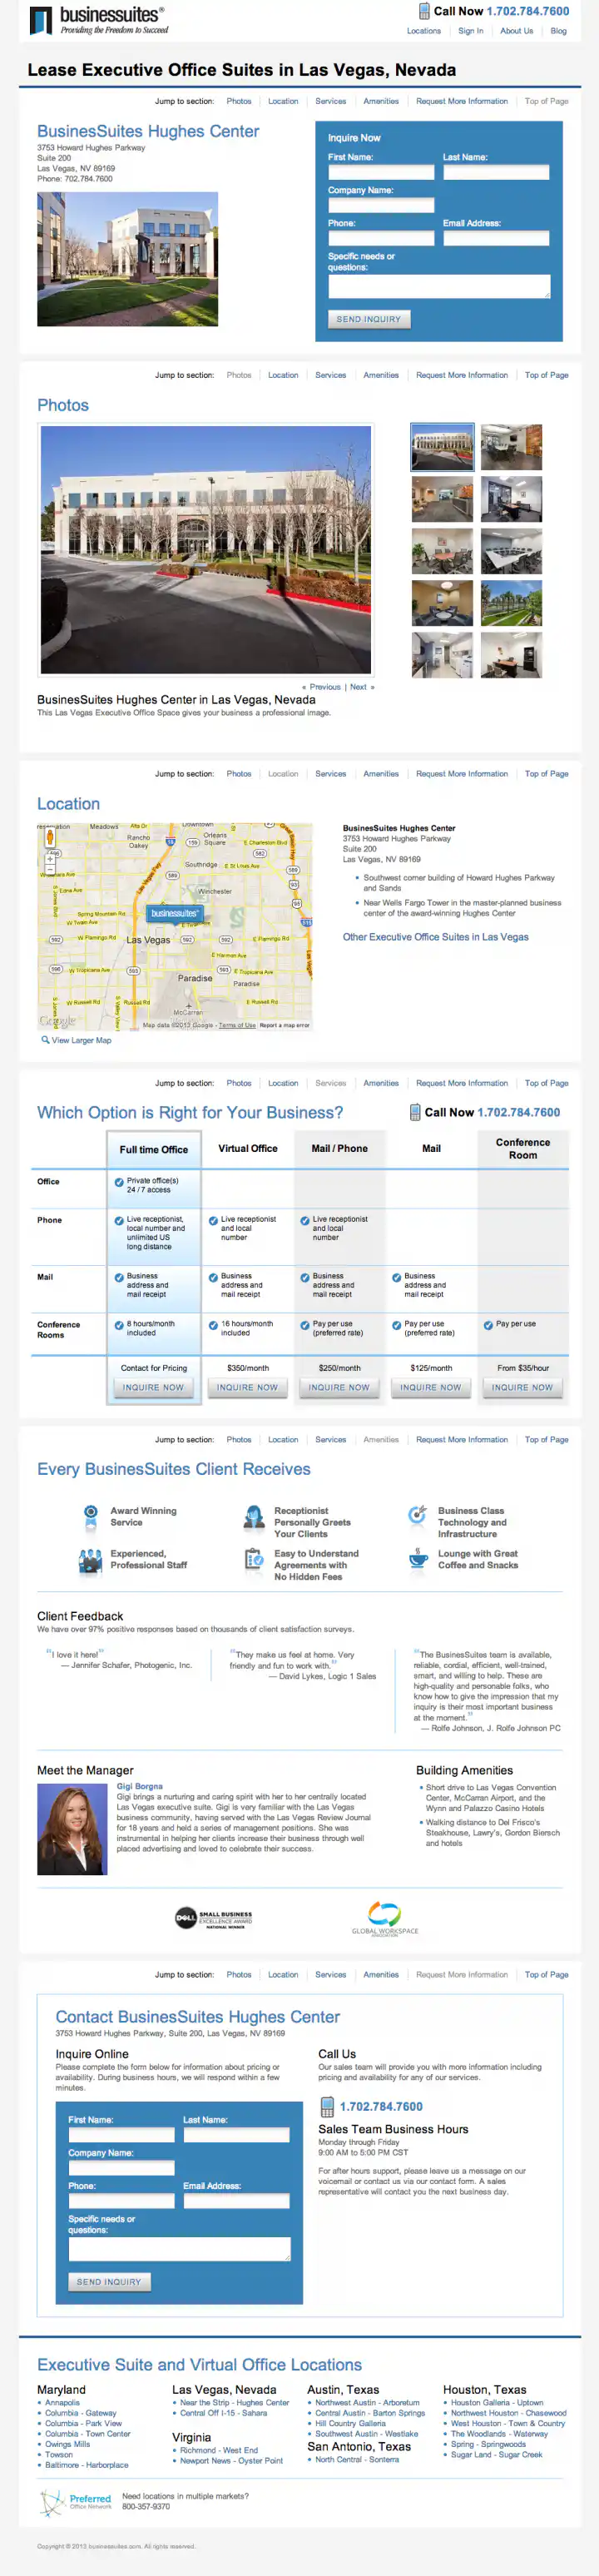 BusinesSuites Property Detail Page - example 2